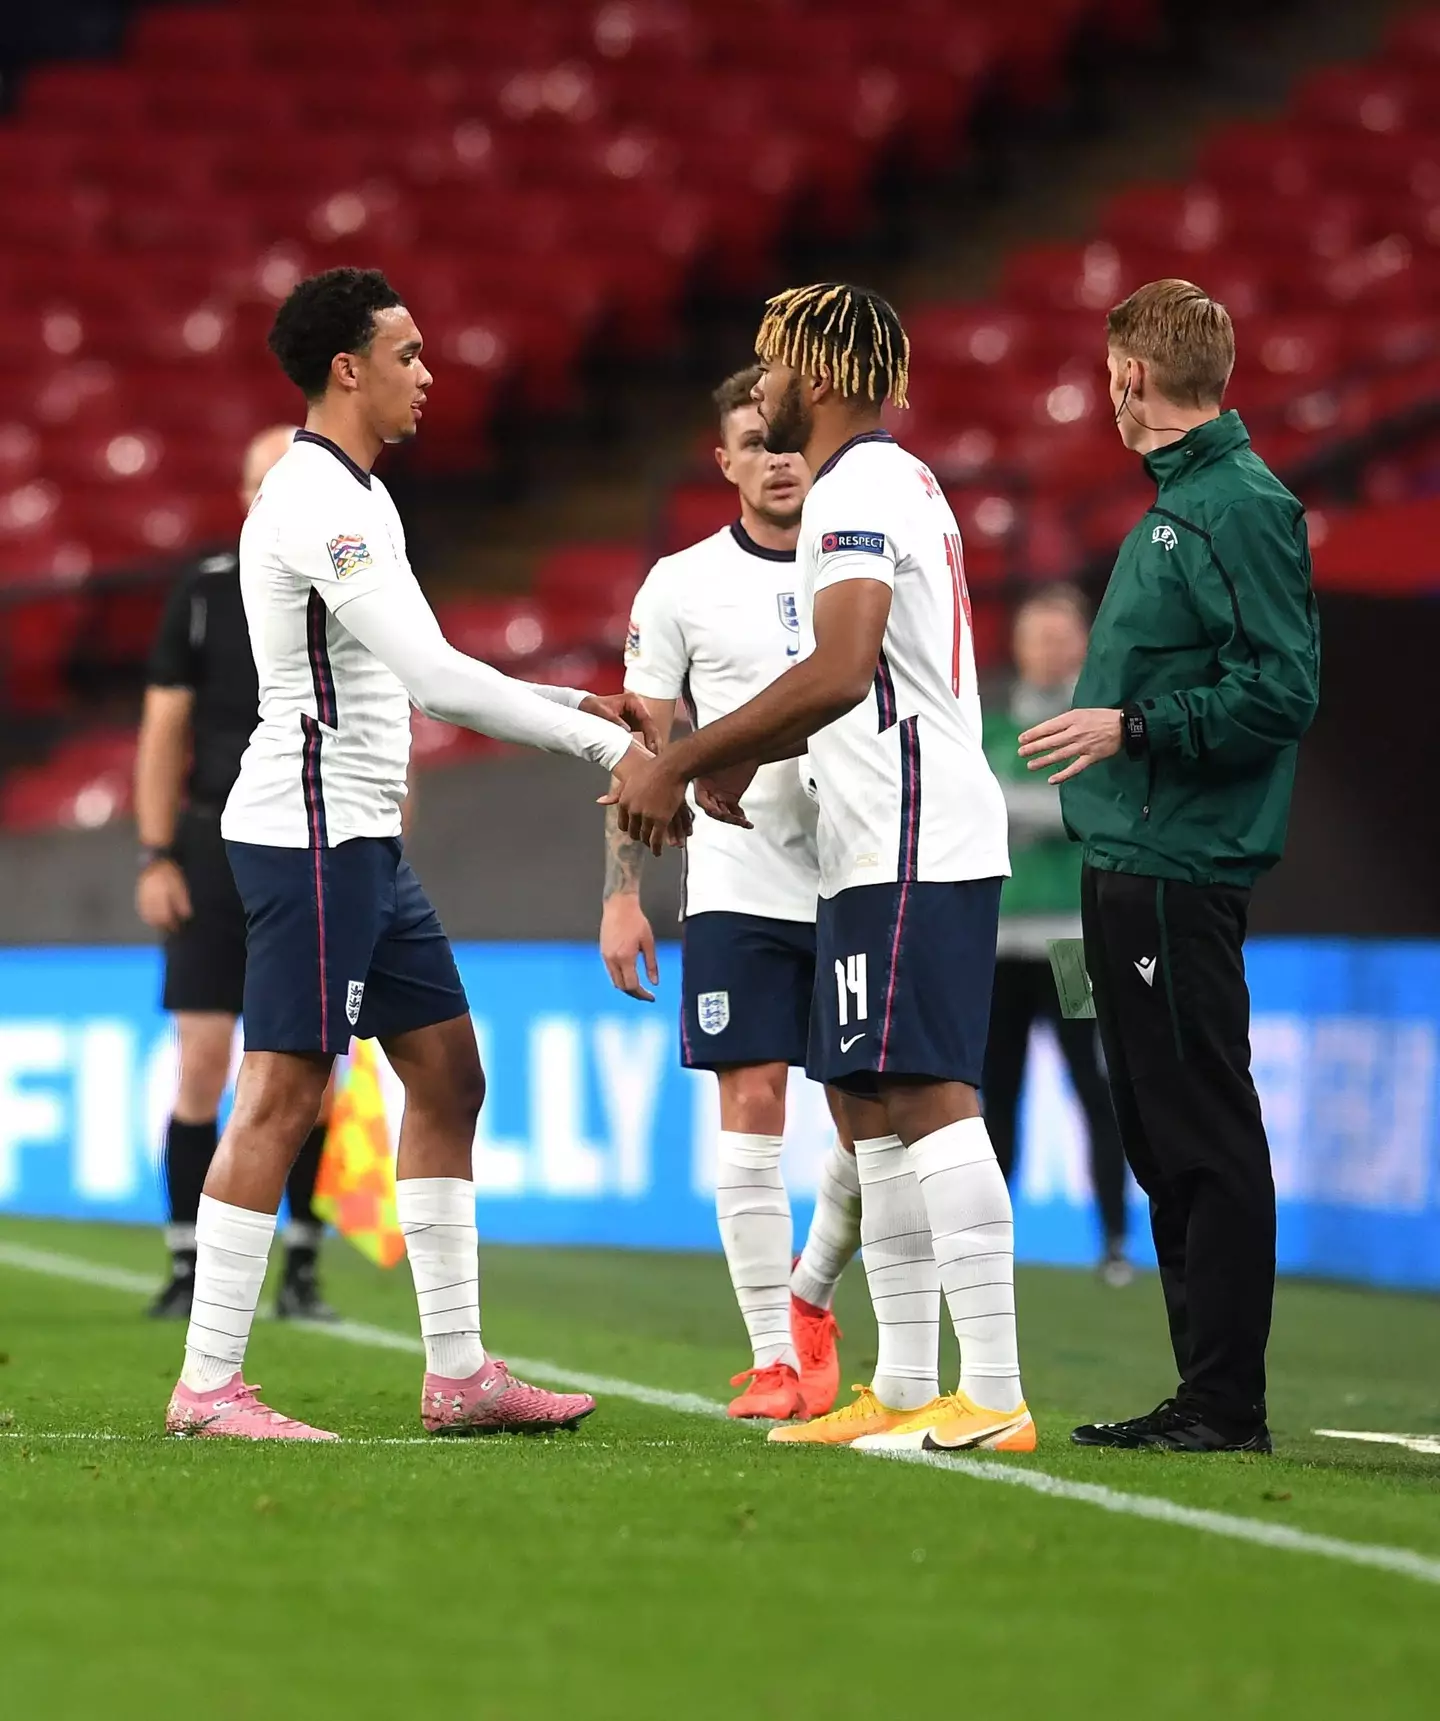 England's Trent Alexander-Arnold substituted for Reece James during the UEFA Nations League Group 2. (Alamy)